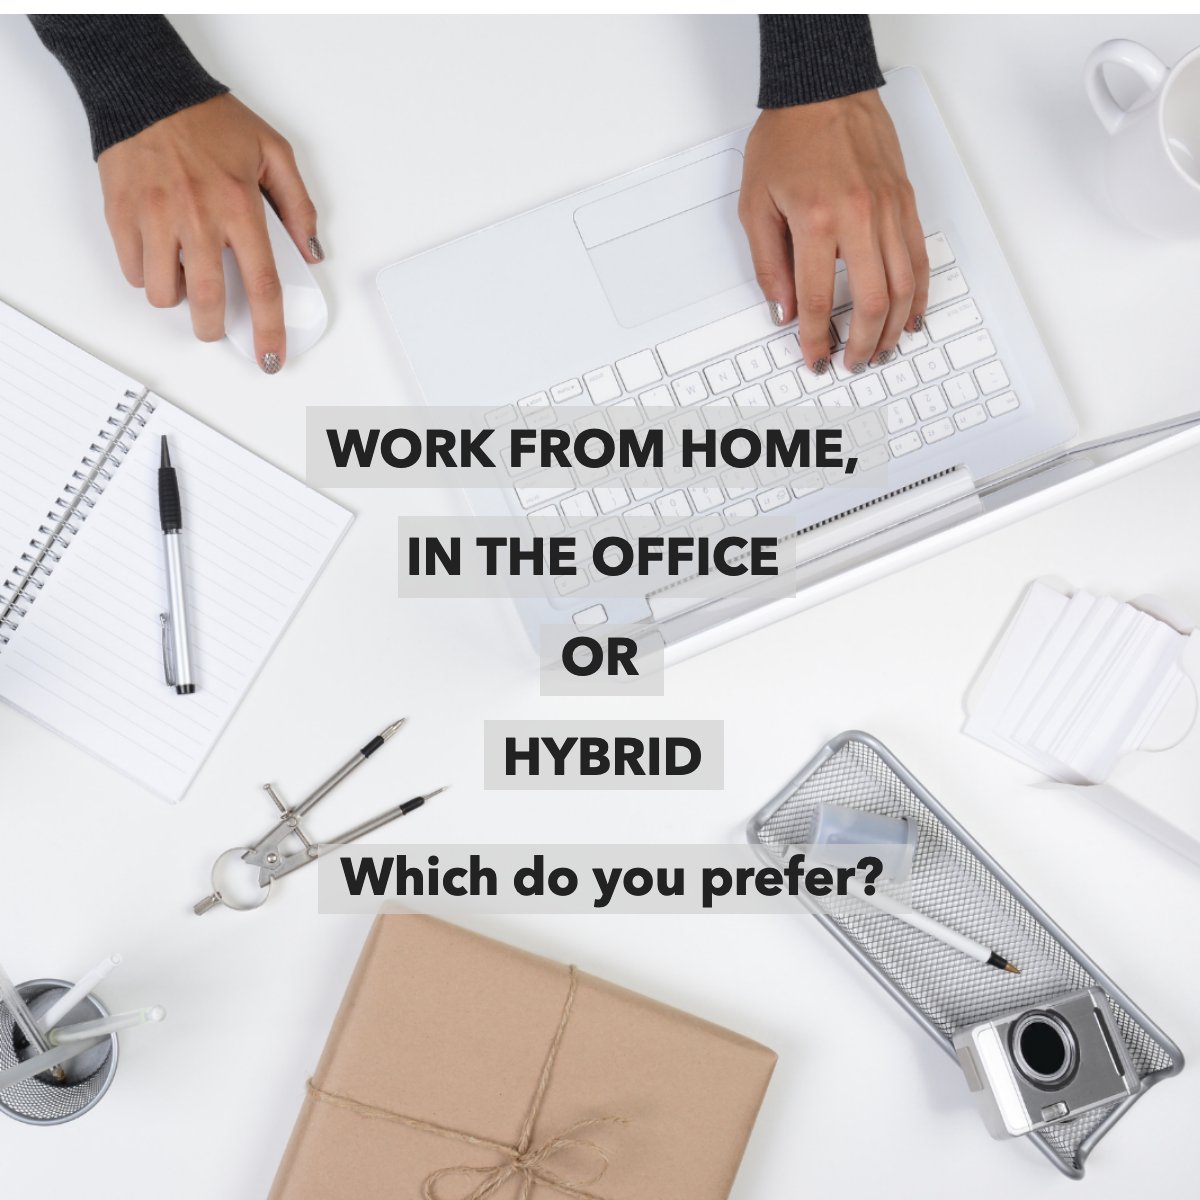 Do you have a dedicated working space? 💻
 
Tell us in the comments! 💭 

#question #workspace #worklife #homeoffice #hybridwork
 #realestatelionazreatlortophomesalelionhomeloans